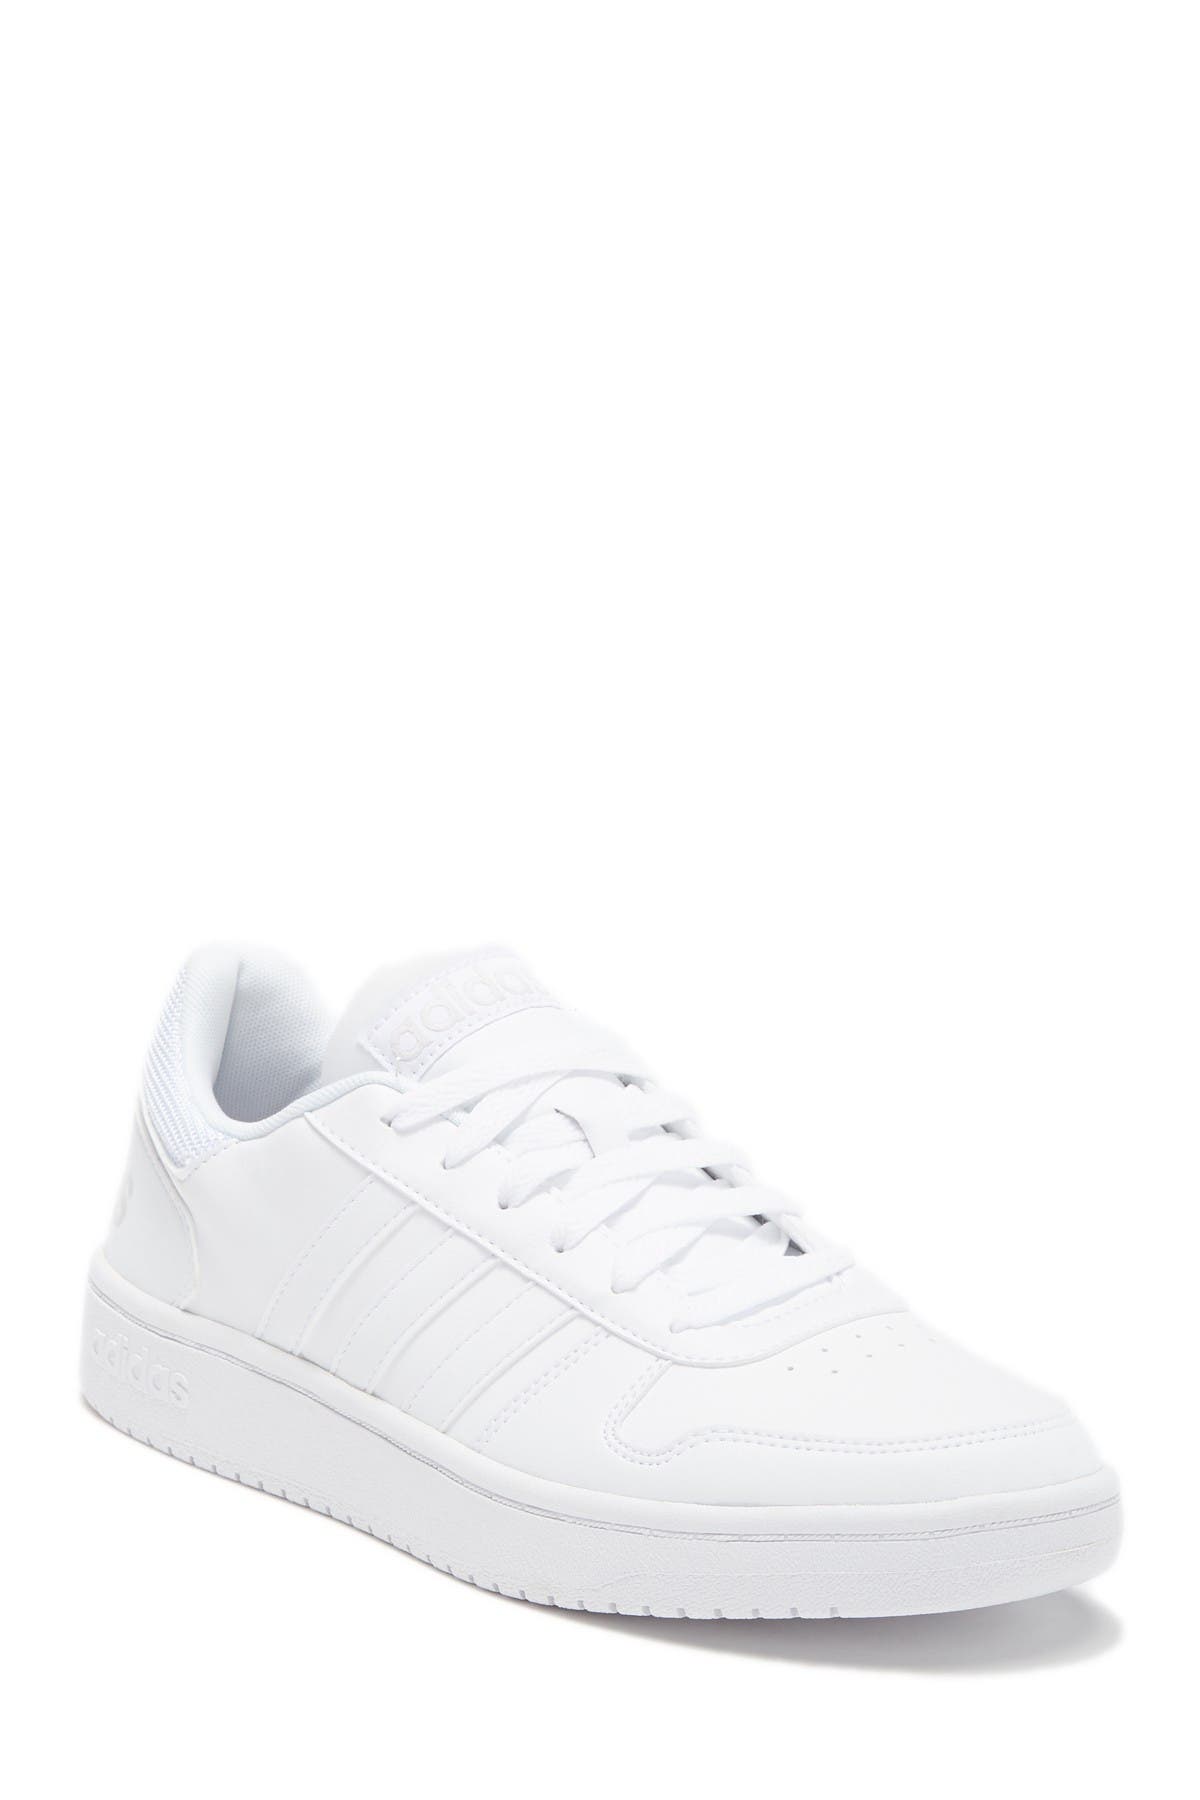 adidas hoops 2.0 low white